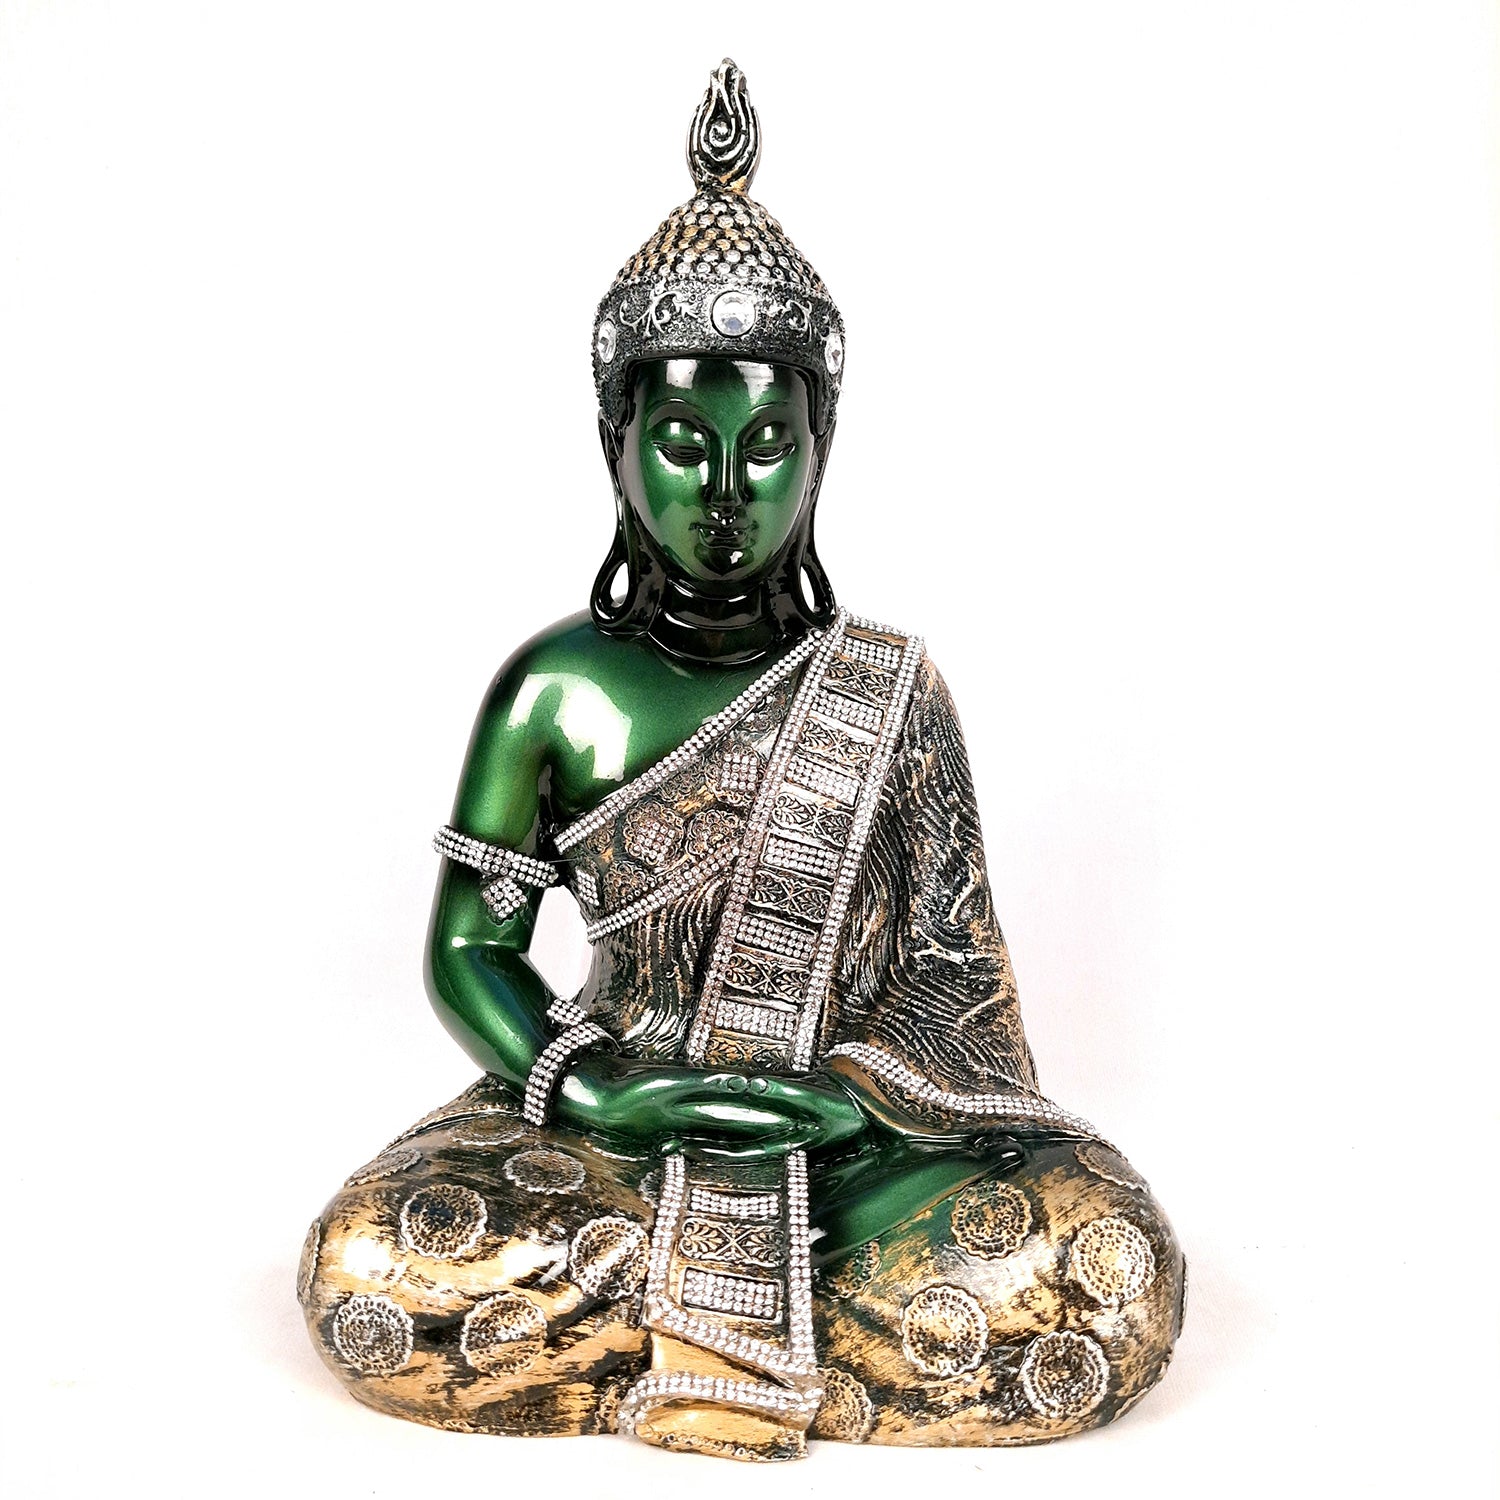 Handmade Best Quality Very Delicate Wooden Buddha Statue for Home Decor Gift  item at Rs 2300 | लकड़ी से बनी बुद्ध की मूर्ति in Jaipur | ID: 3818928673